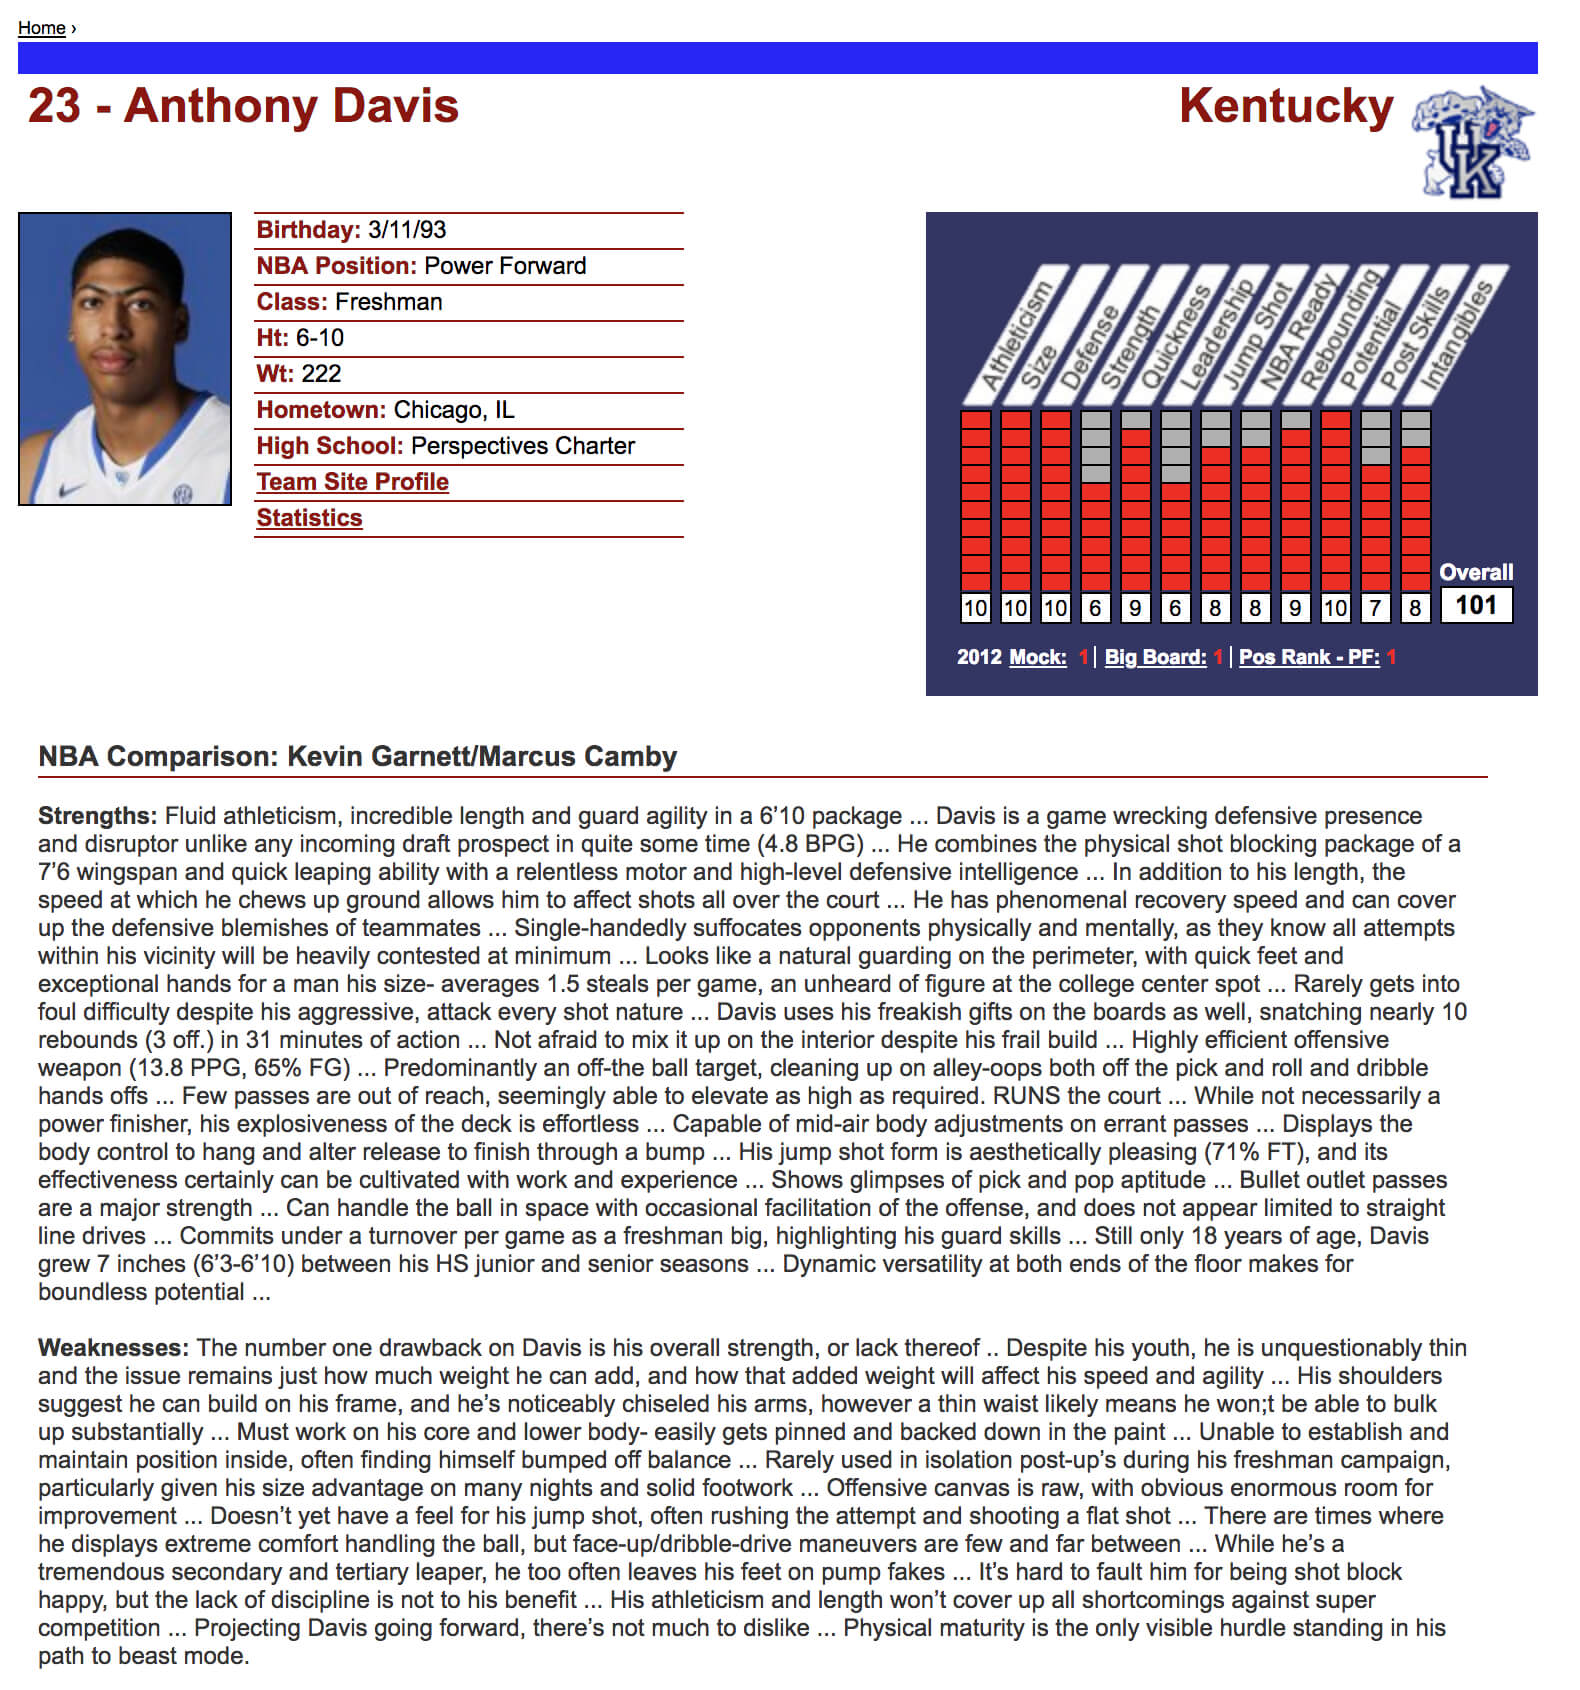 My Model Monday: Nba Draft Scouting Text Analysis | Model 284 Inside Basketball Player Scouting Report Template